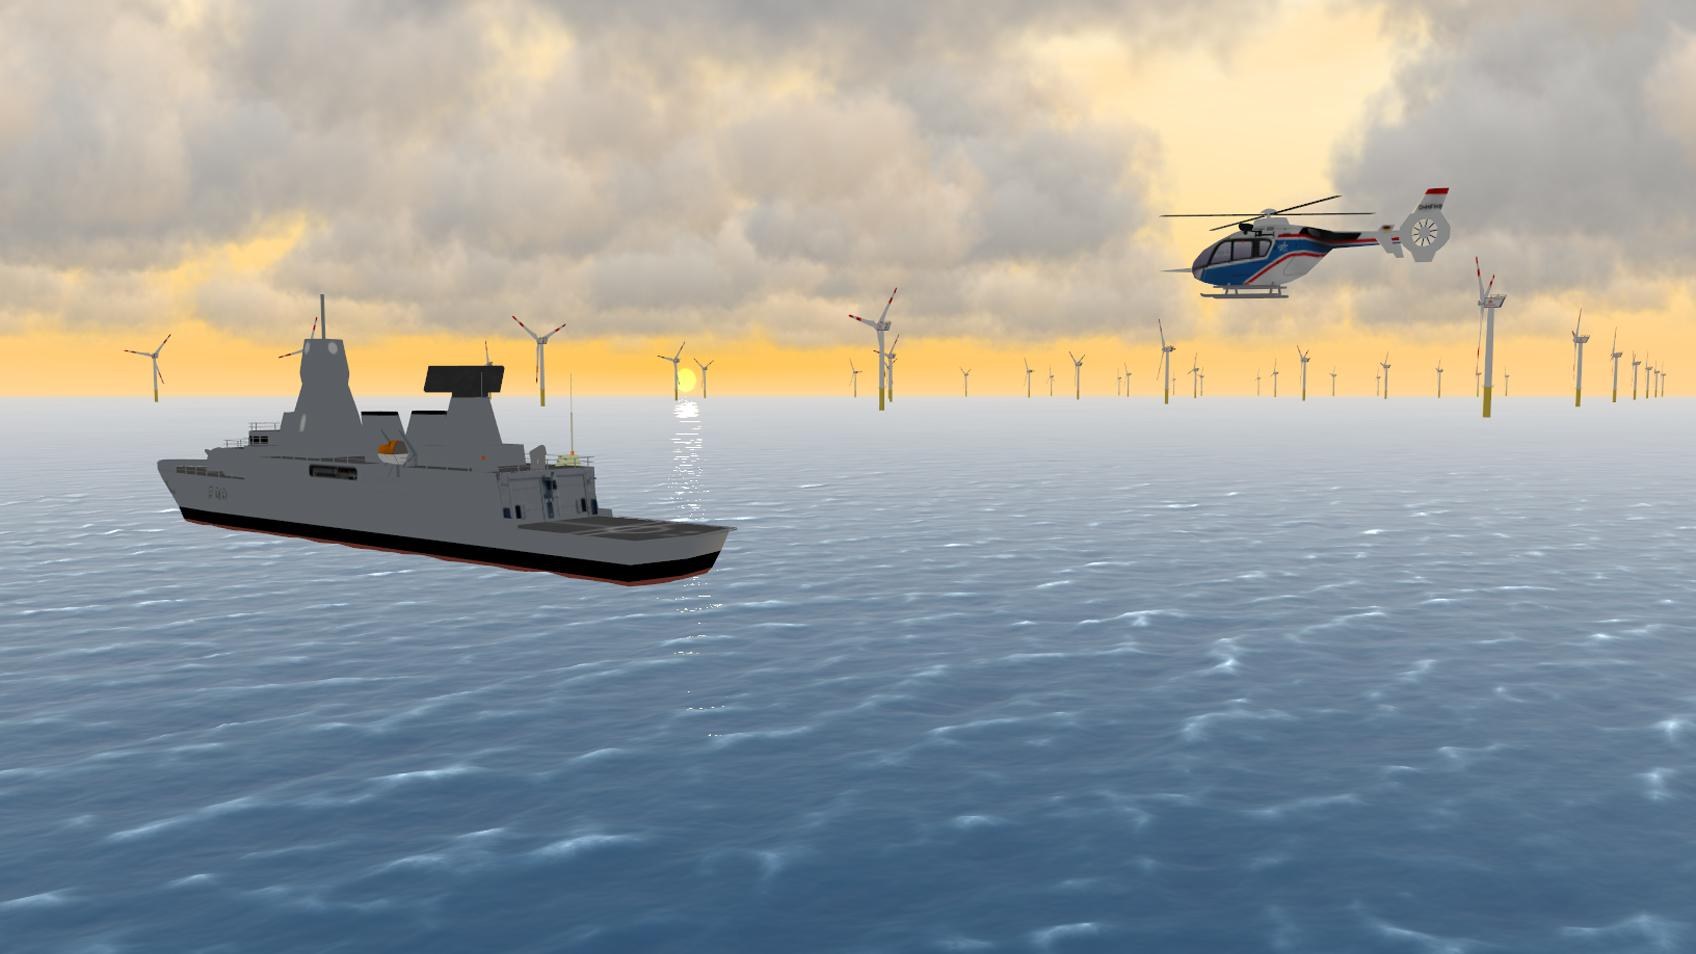 Simulated flight near an offshore wind farm in the AVES with good weather conditions